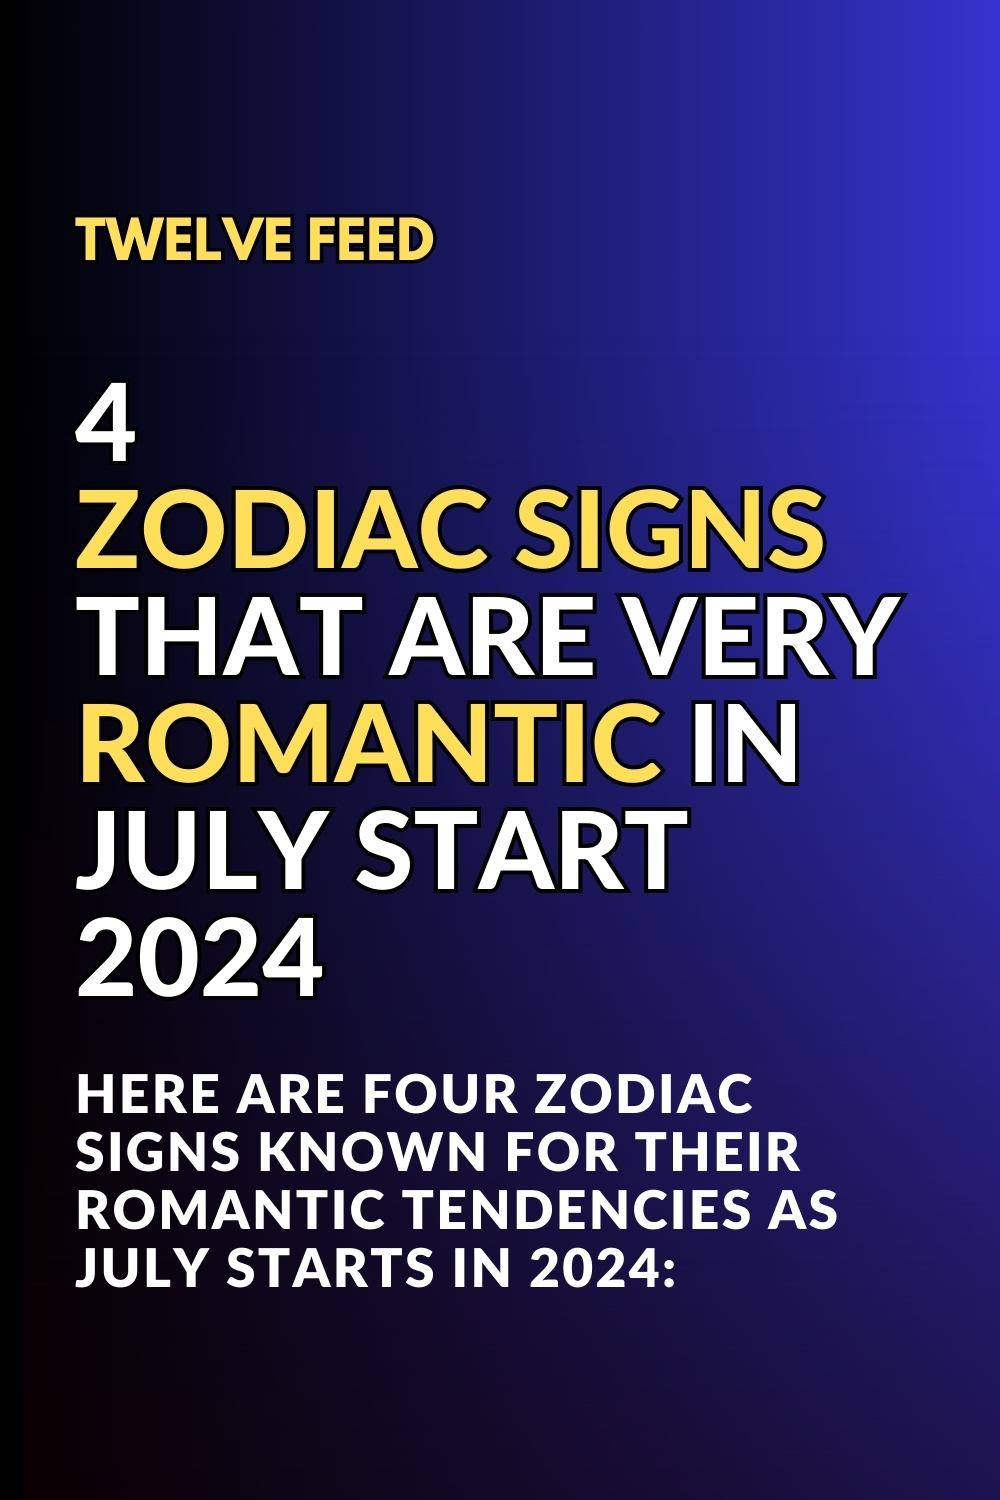 4 Zodiac Signs That Are Very Romantic In July Start 2024